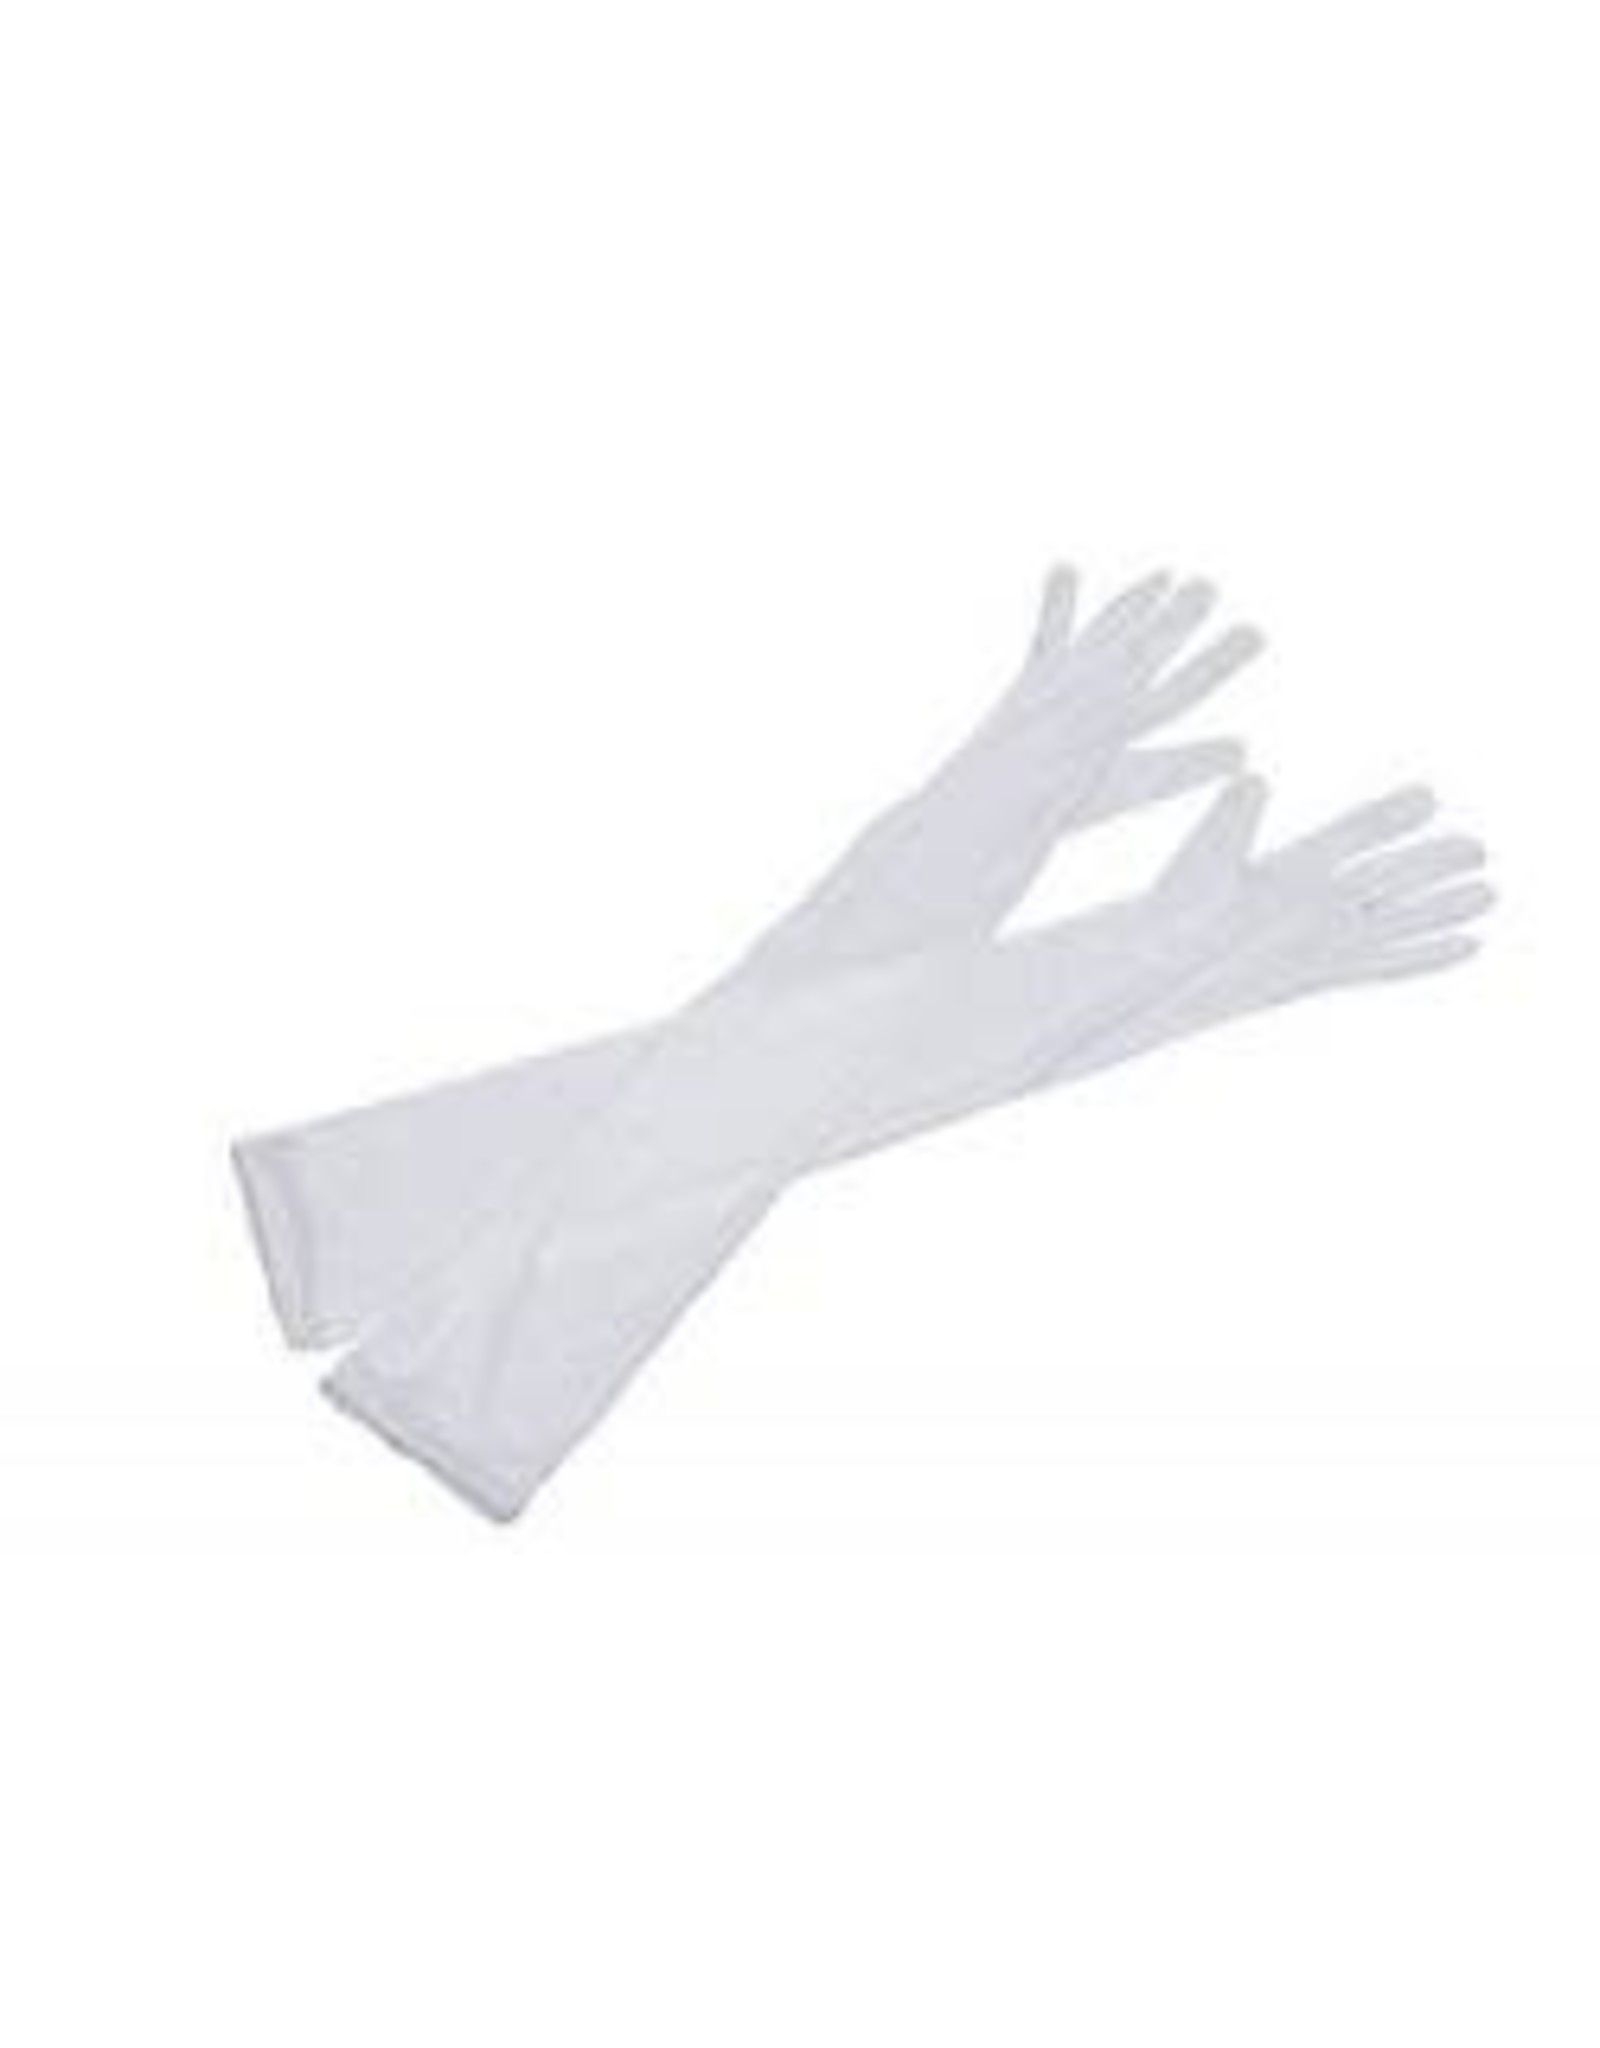 Jacobson Hat Co. Adult Elbow Length Stretch Gloves, White, Adult, 20633Whao